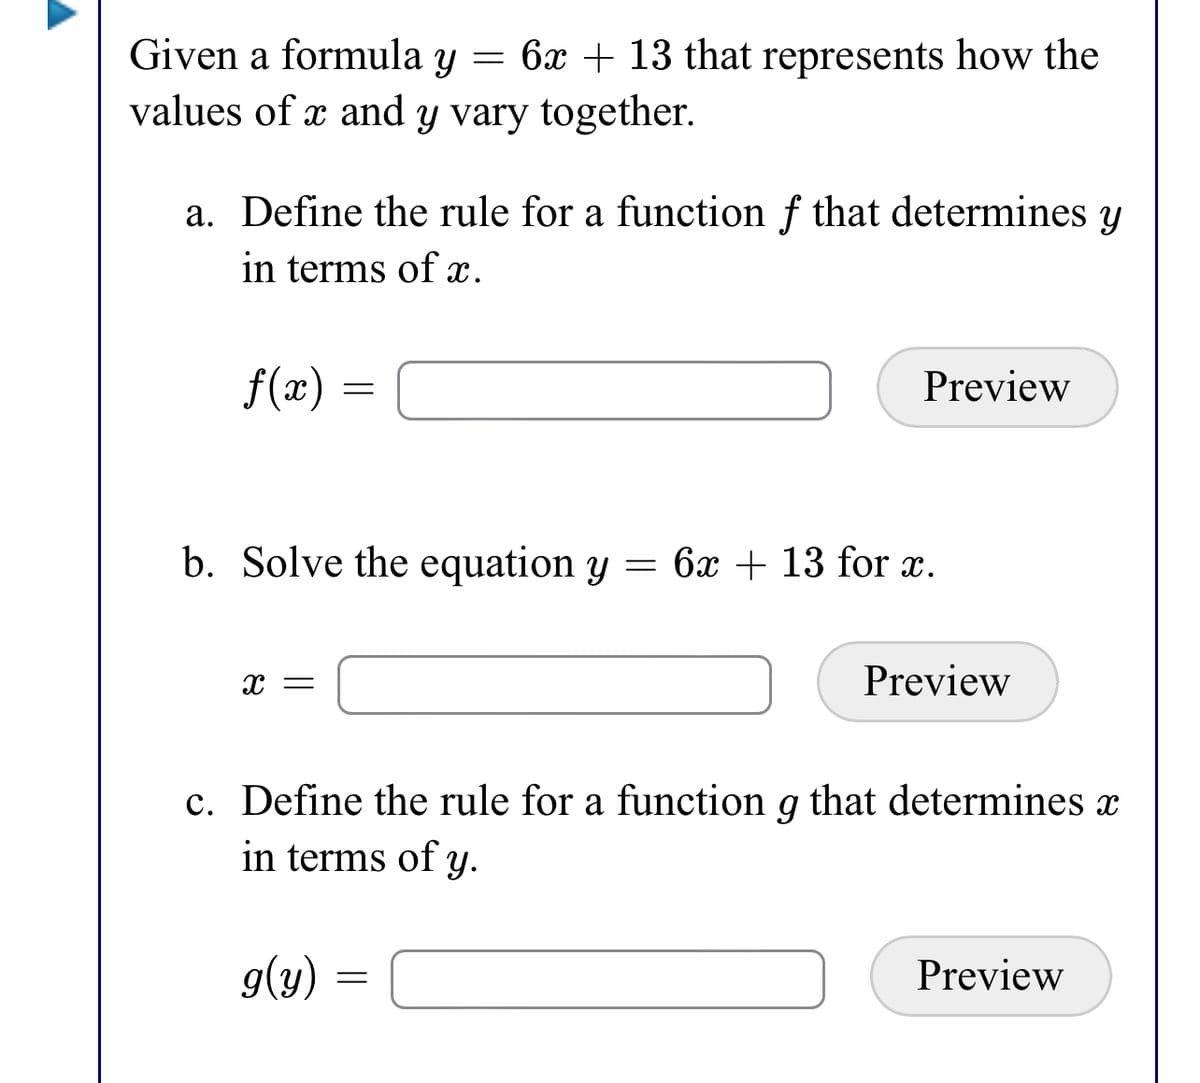 Given a formula y = 6x + 13 that represents how the
values of x and y vary together.
a. Define the rule for a function f that determines y
in terms of x.
f(x)
Preview
b. Solve the equation y = 6x + 13 for x.
Preview
c. Define the rule for a function g that determines x
in terms of y.
g(y)
Preview
